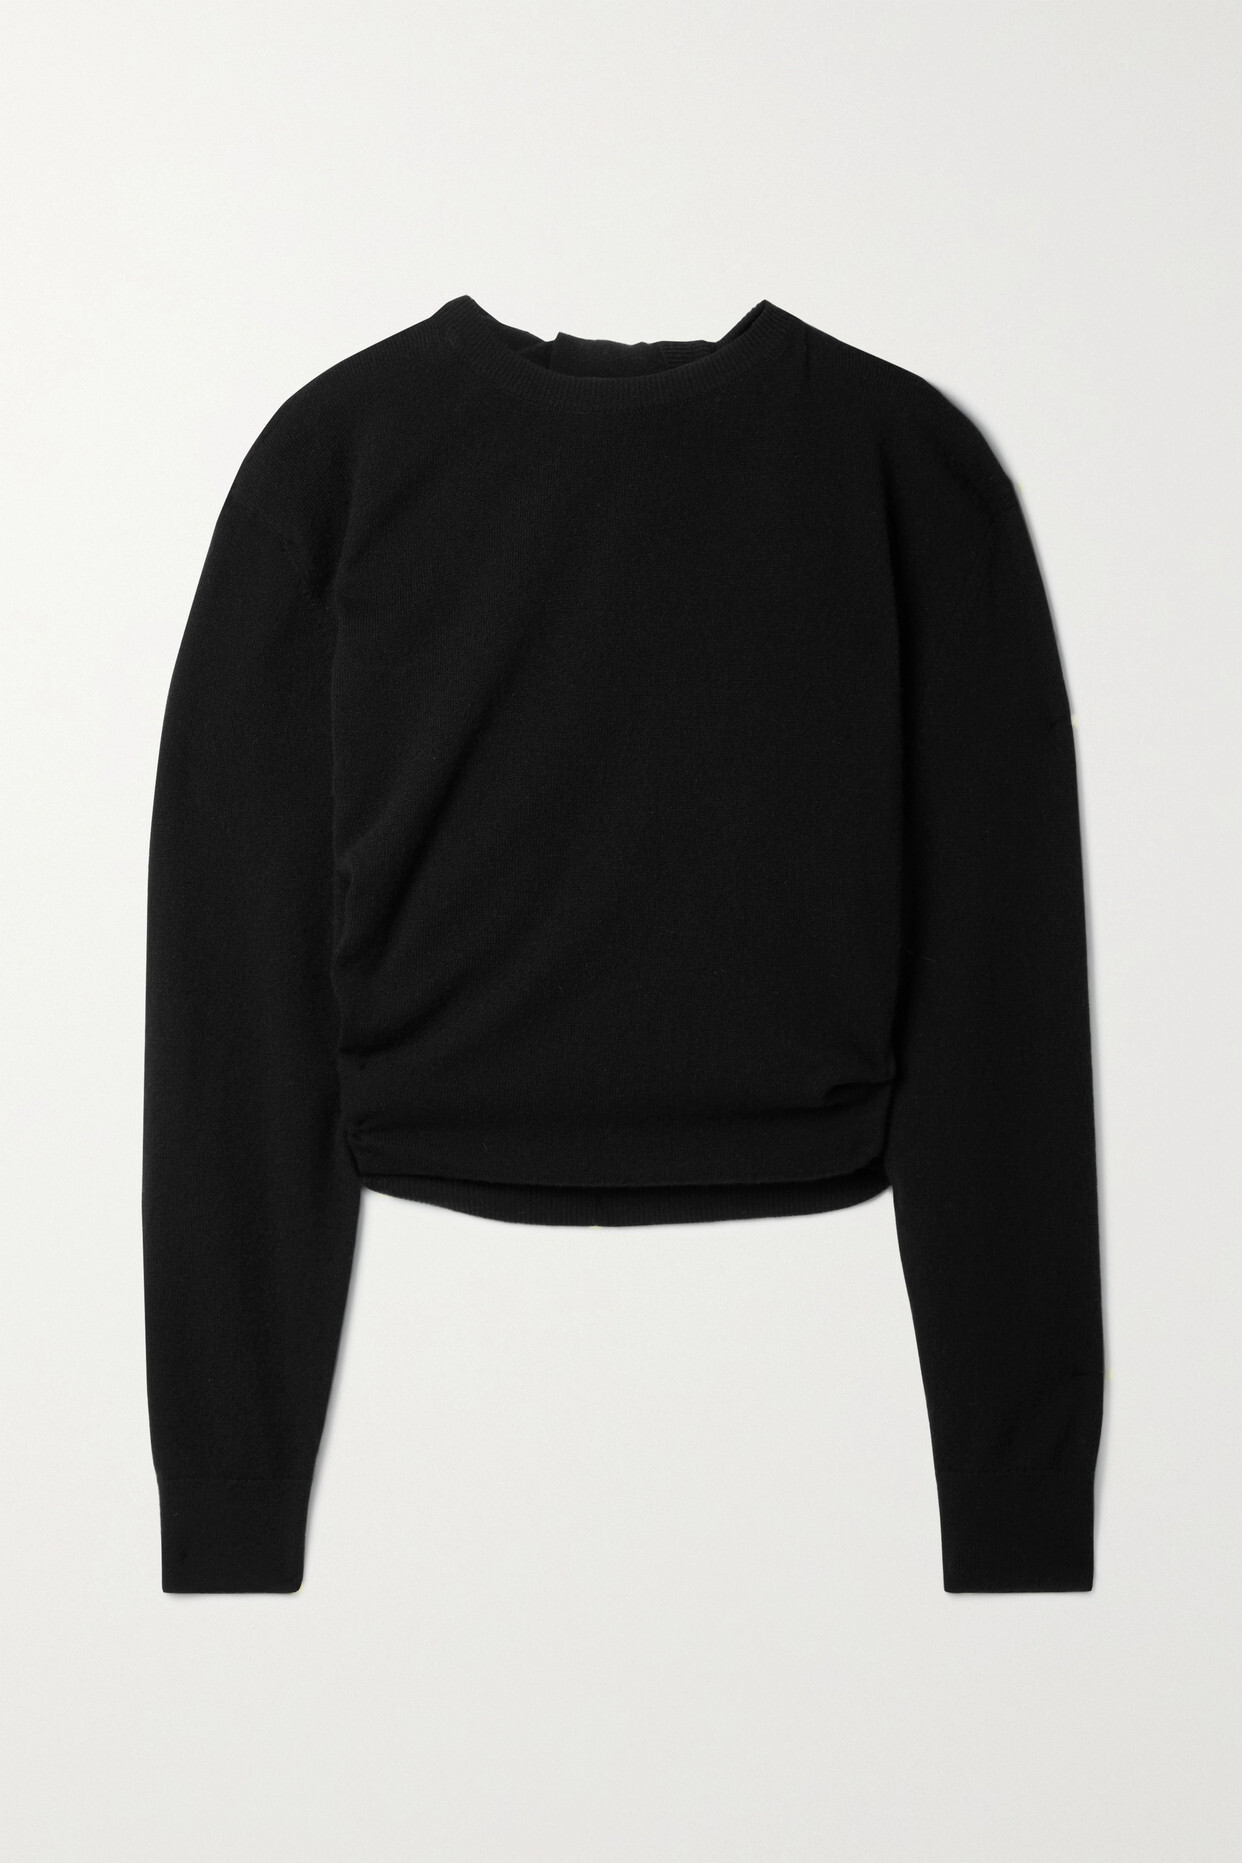 The Row - Laris Twisted Cashmere Sweater - Black